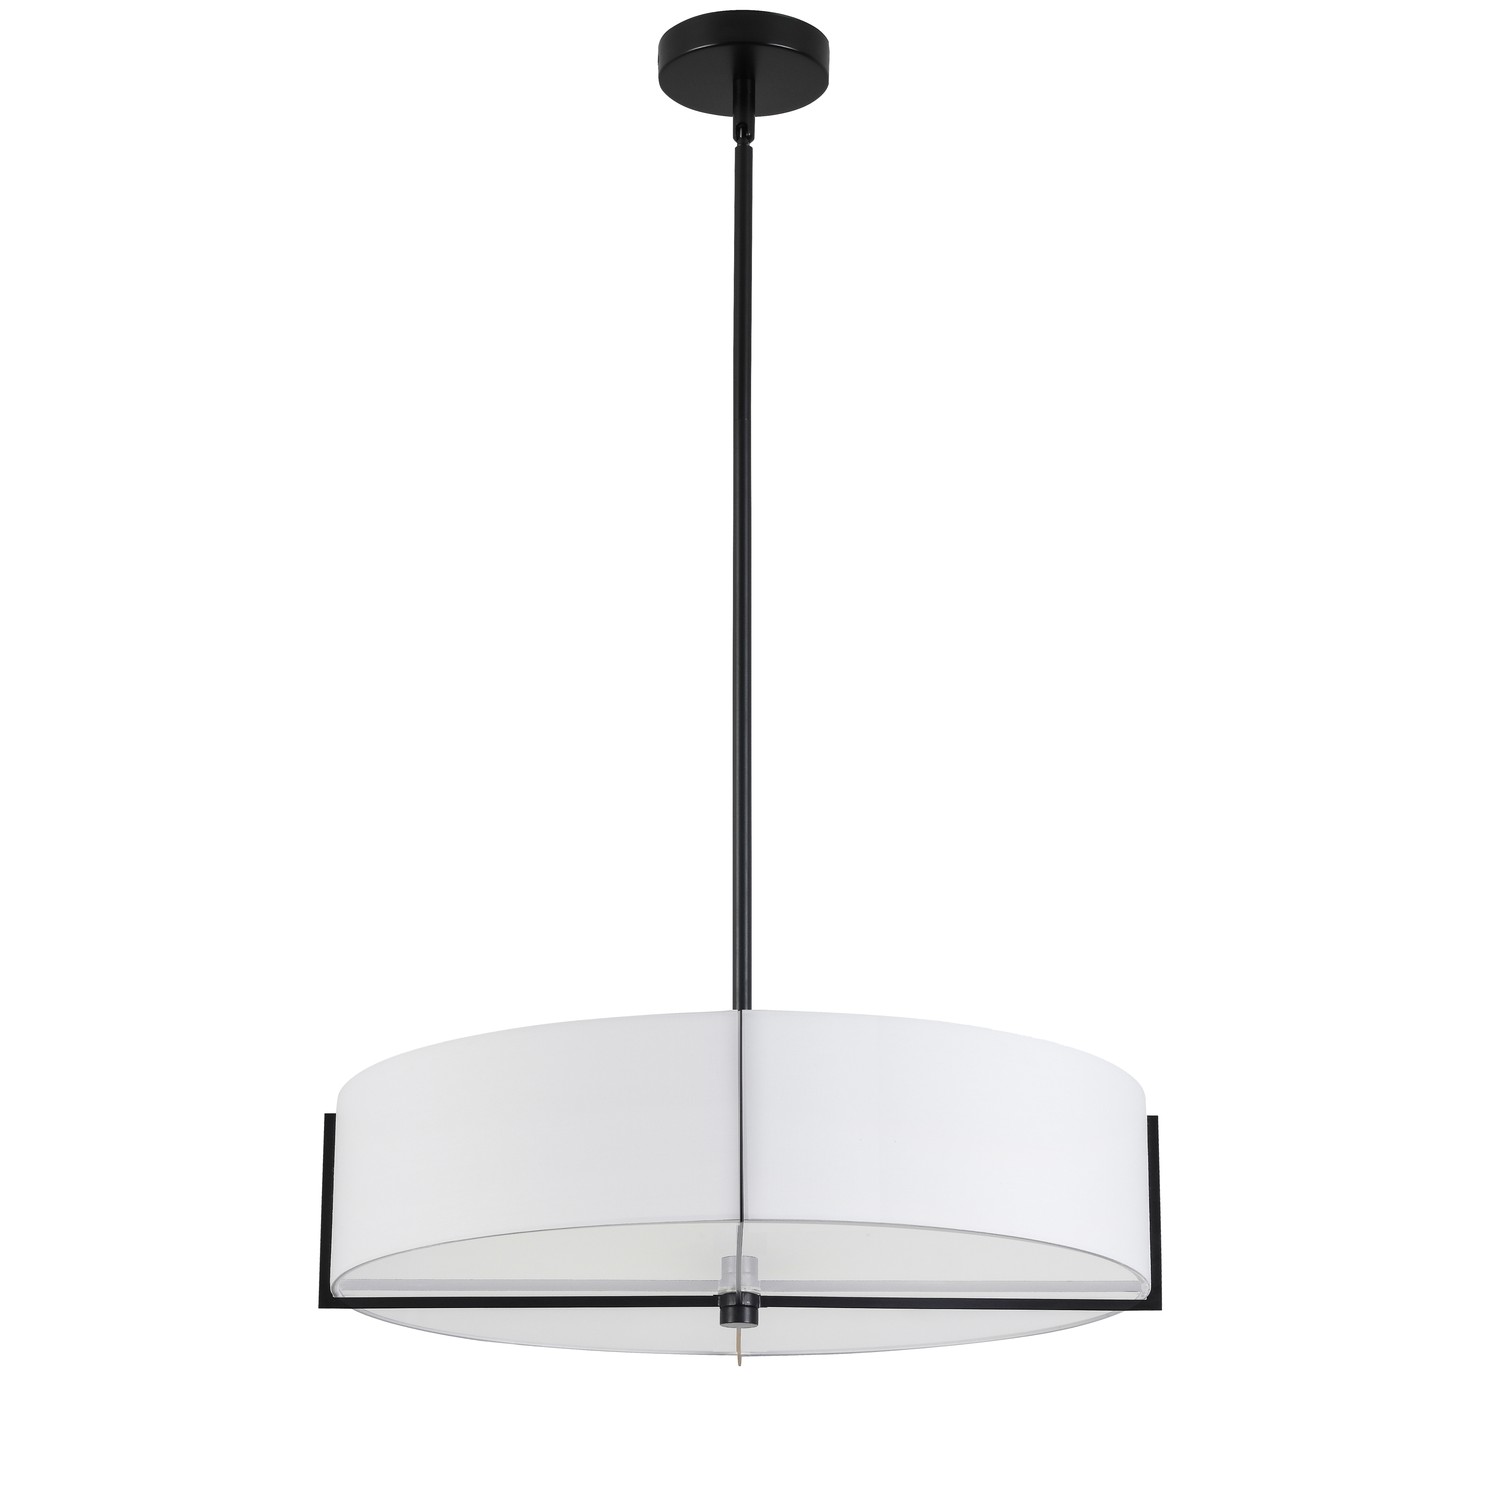 4 Light Incandescent Pendant, Matte Black with White Shade